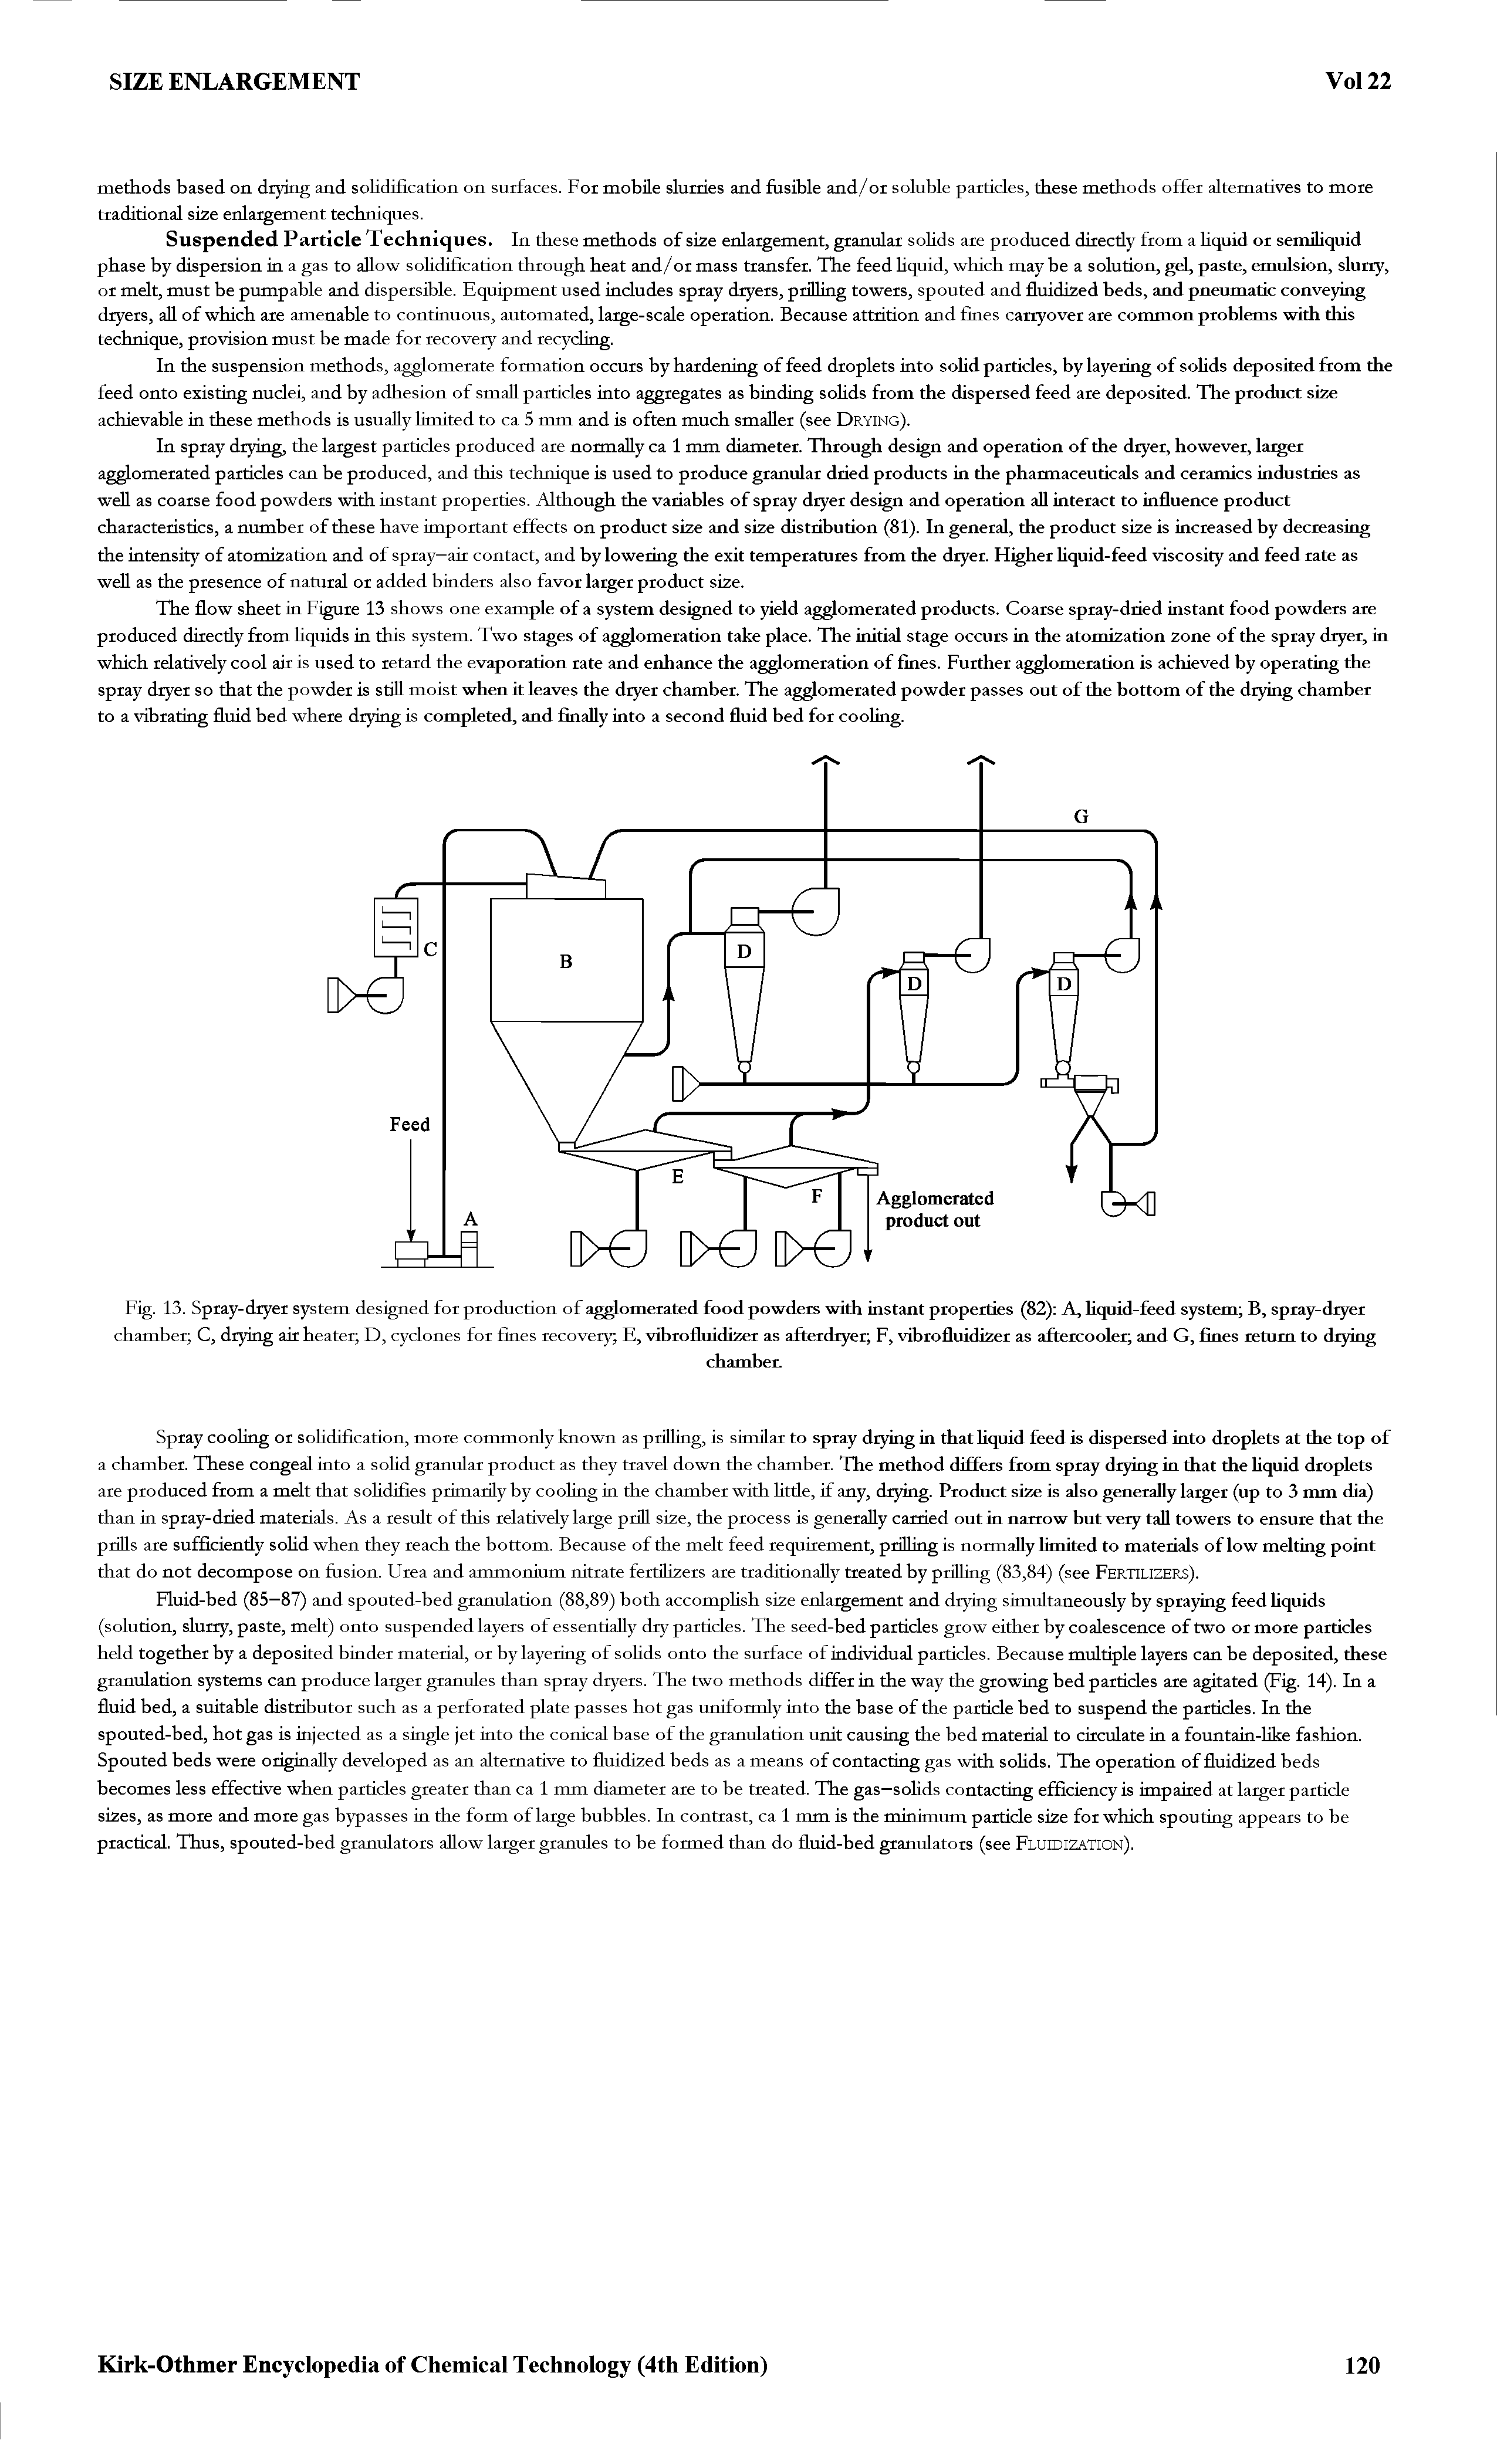 Fig. 13. Spray-dryer system designed for production of agglomerated food powders with instant properties (82) A, liquid-feed system B, spray-dryer chamber C, drying air heater D, cyclones for fines recovery E, vibrofluidizer as afterdryer F, vibrofluidizer as aftercooler and G, fines return to drying...